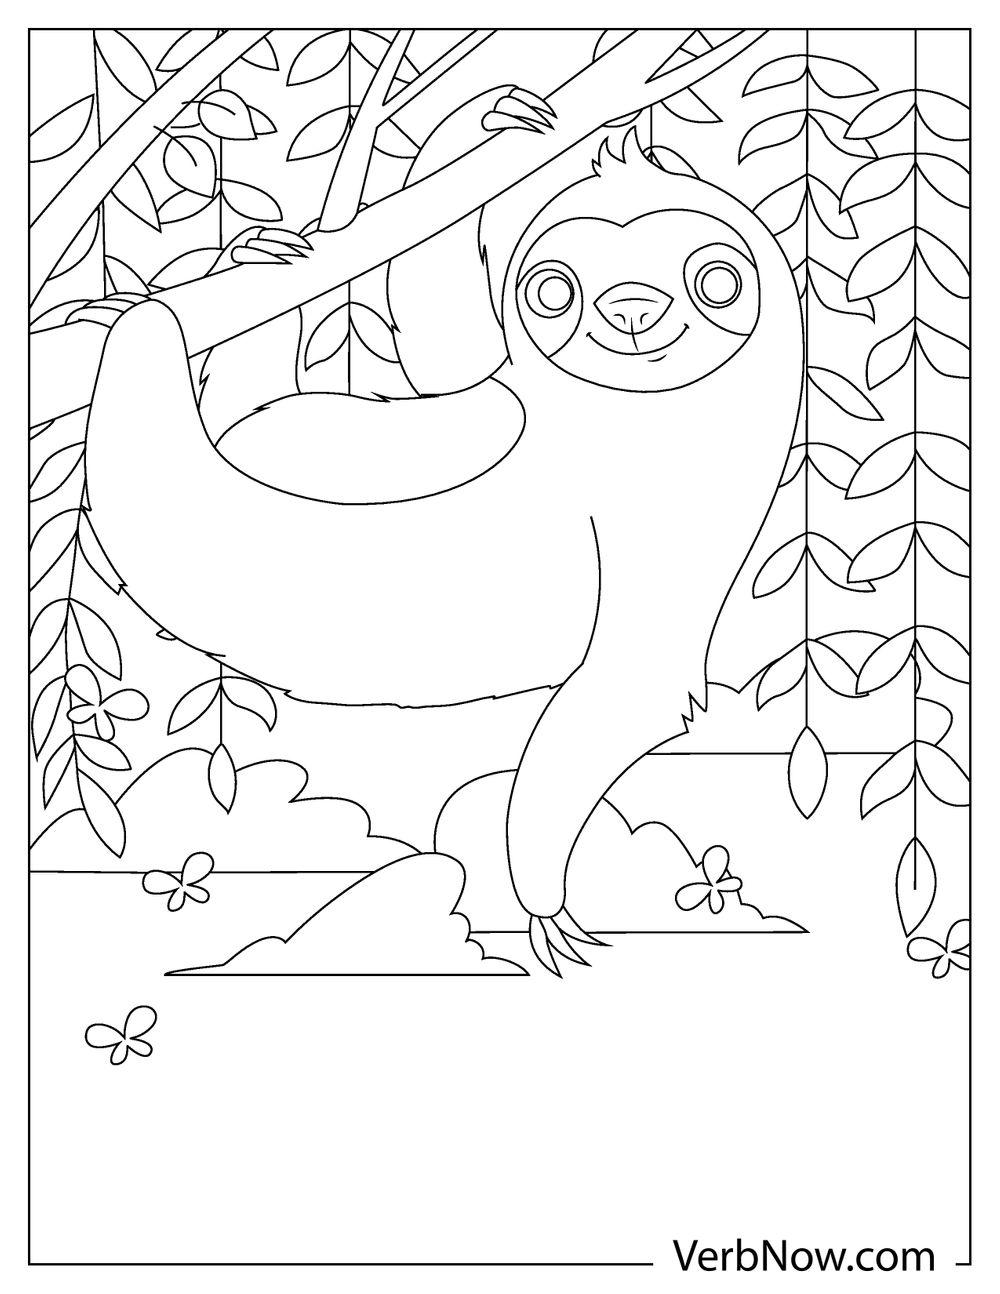 Free SLOTH Coloring Pages & Book for Download (Printable PDF) - VerbNow